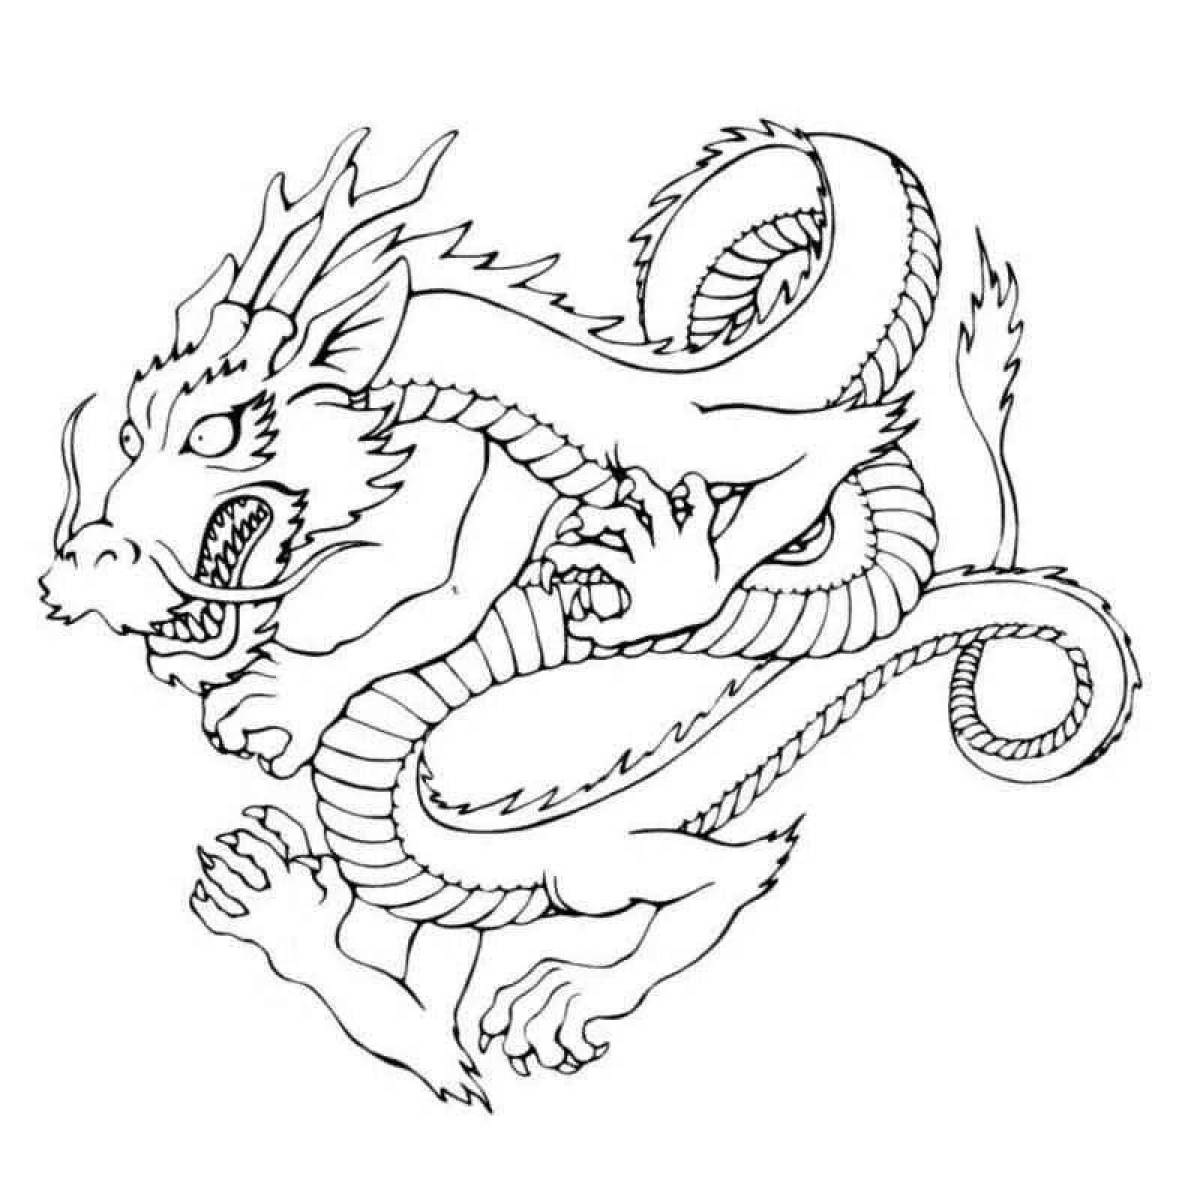 Colorfully illustrated Chinese dragon coloring book